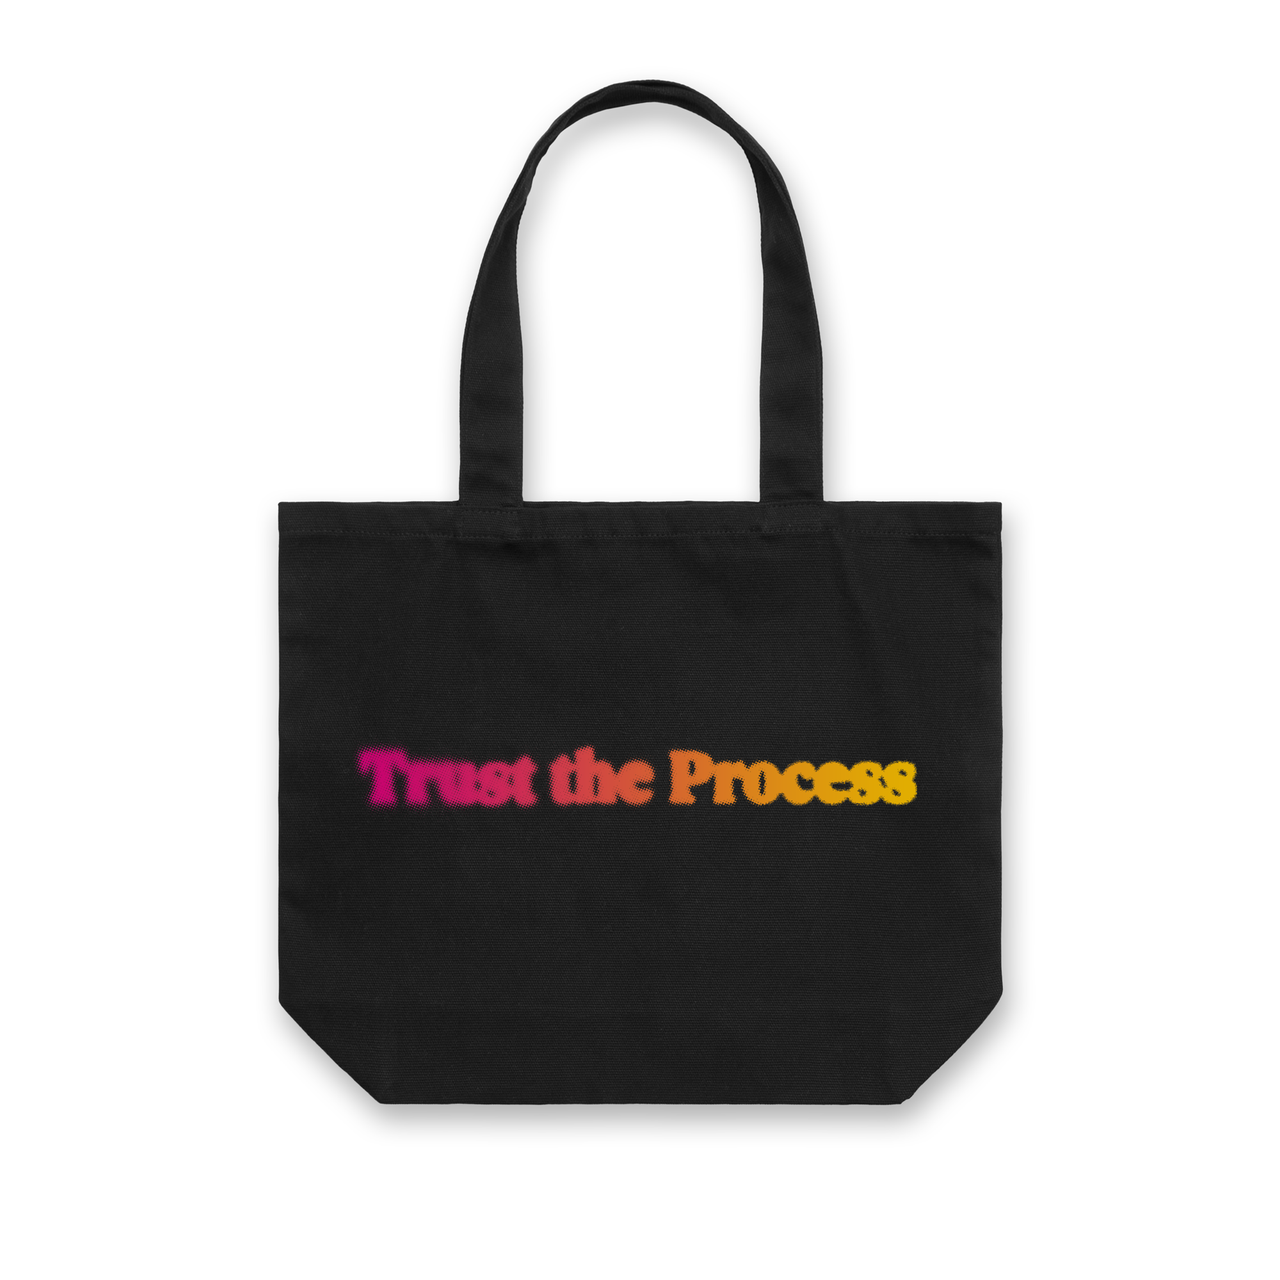 "Trust the Process" Large Tote Bag